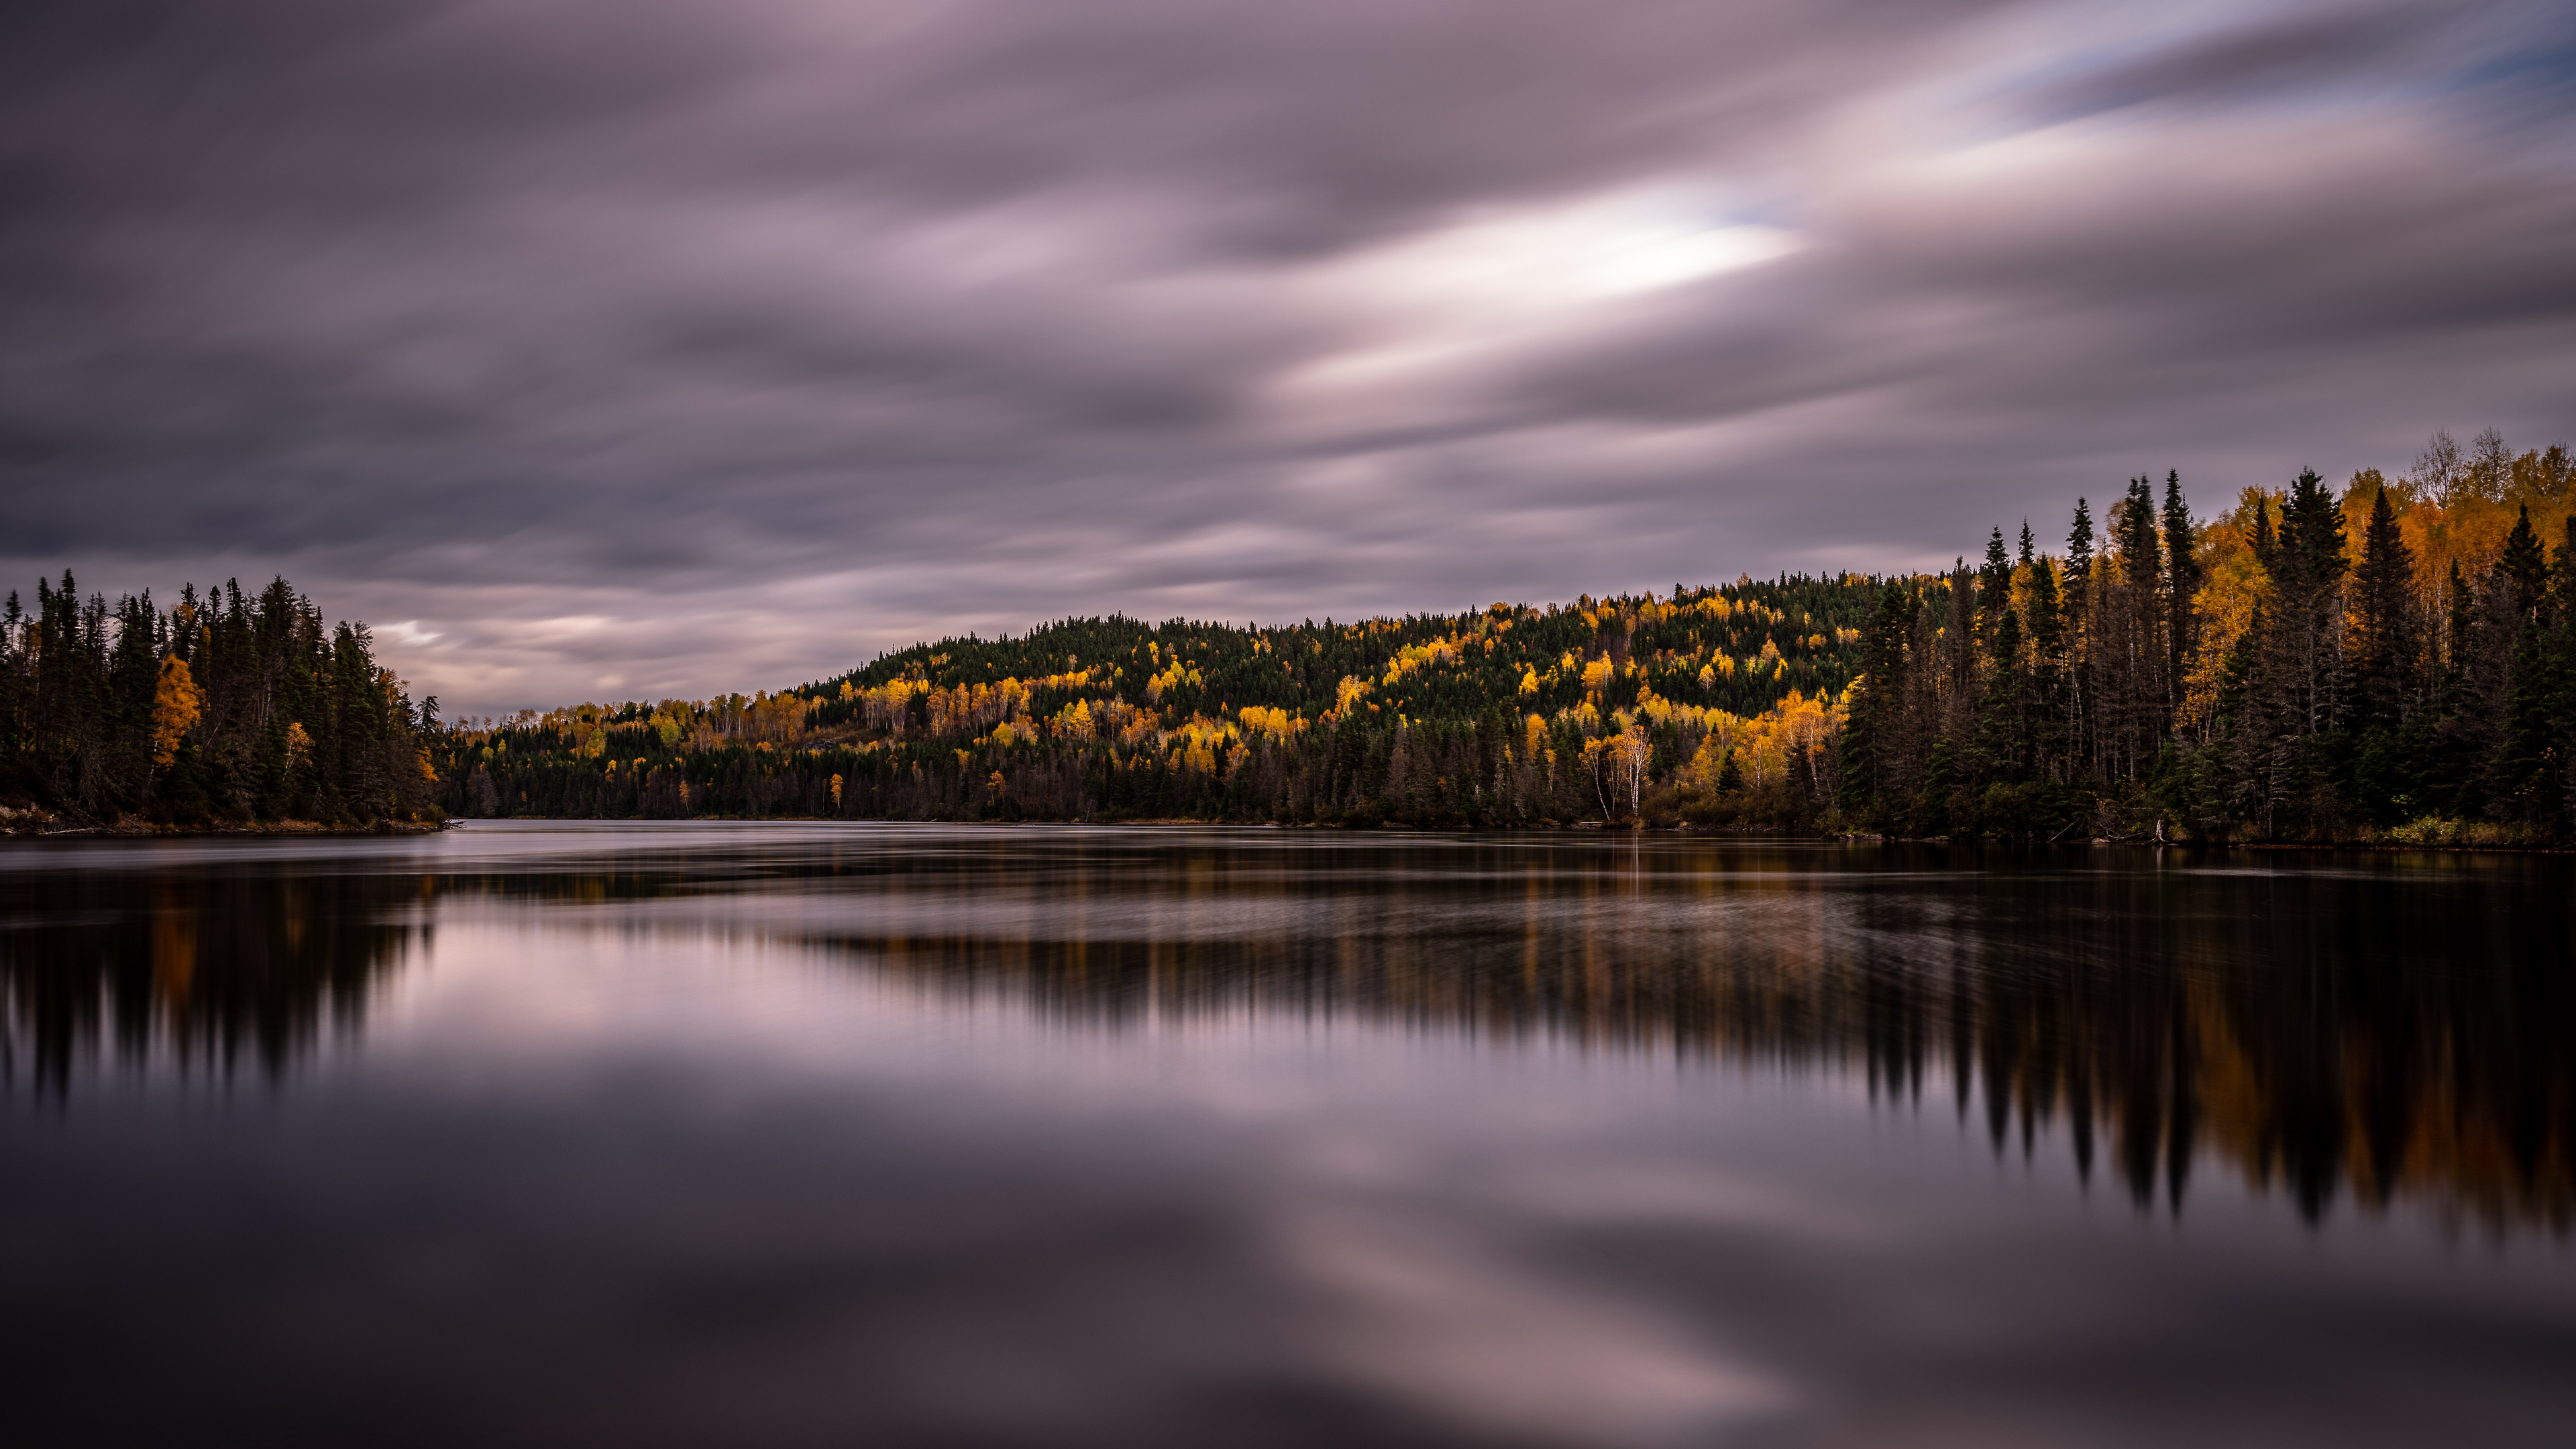 General 3840x2160 photography landscape nature forest trees reflection lake water long exposure clouds sky